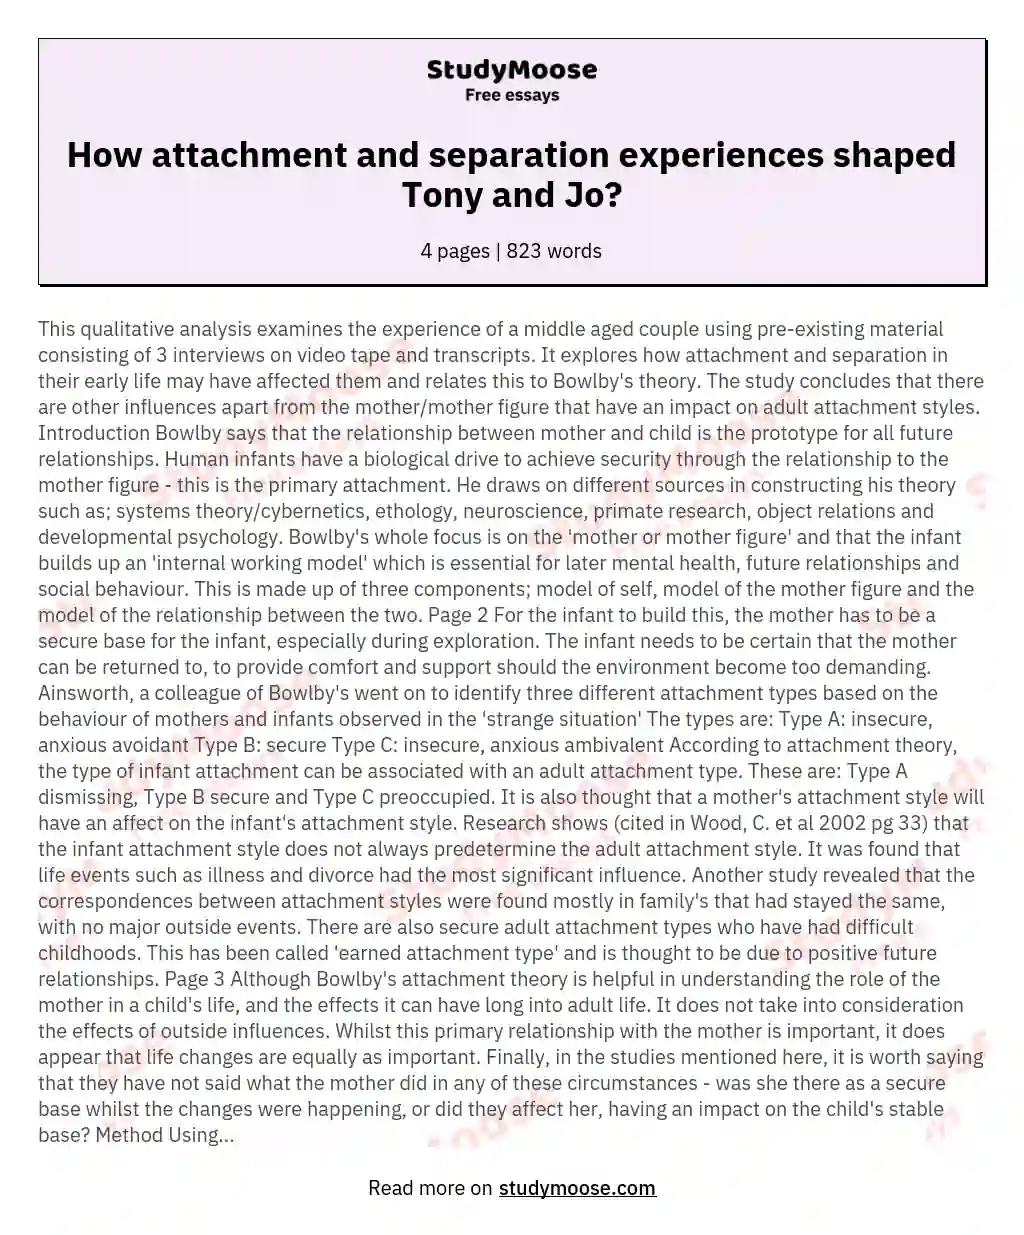 How do Tony and Jo think their experiences of attachment and separation may have affected them?